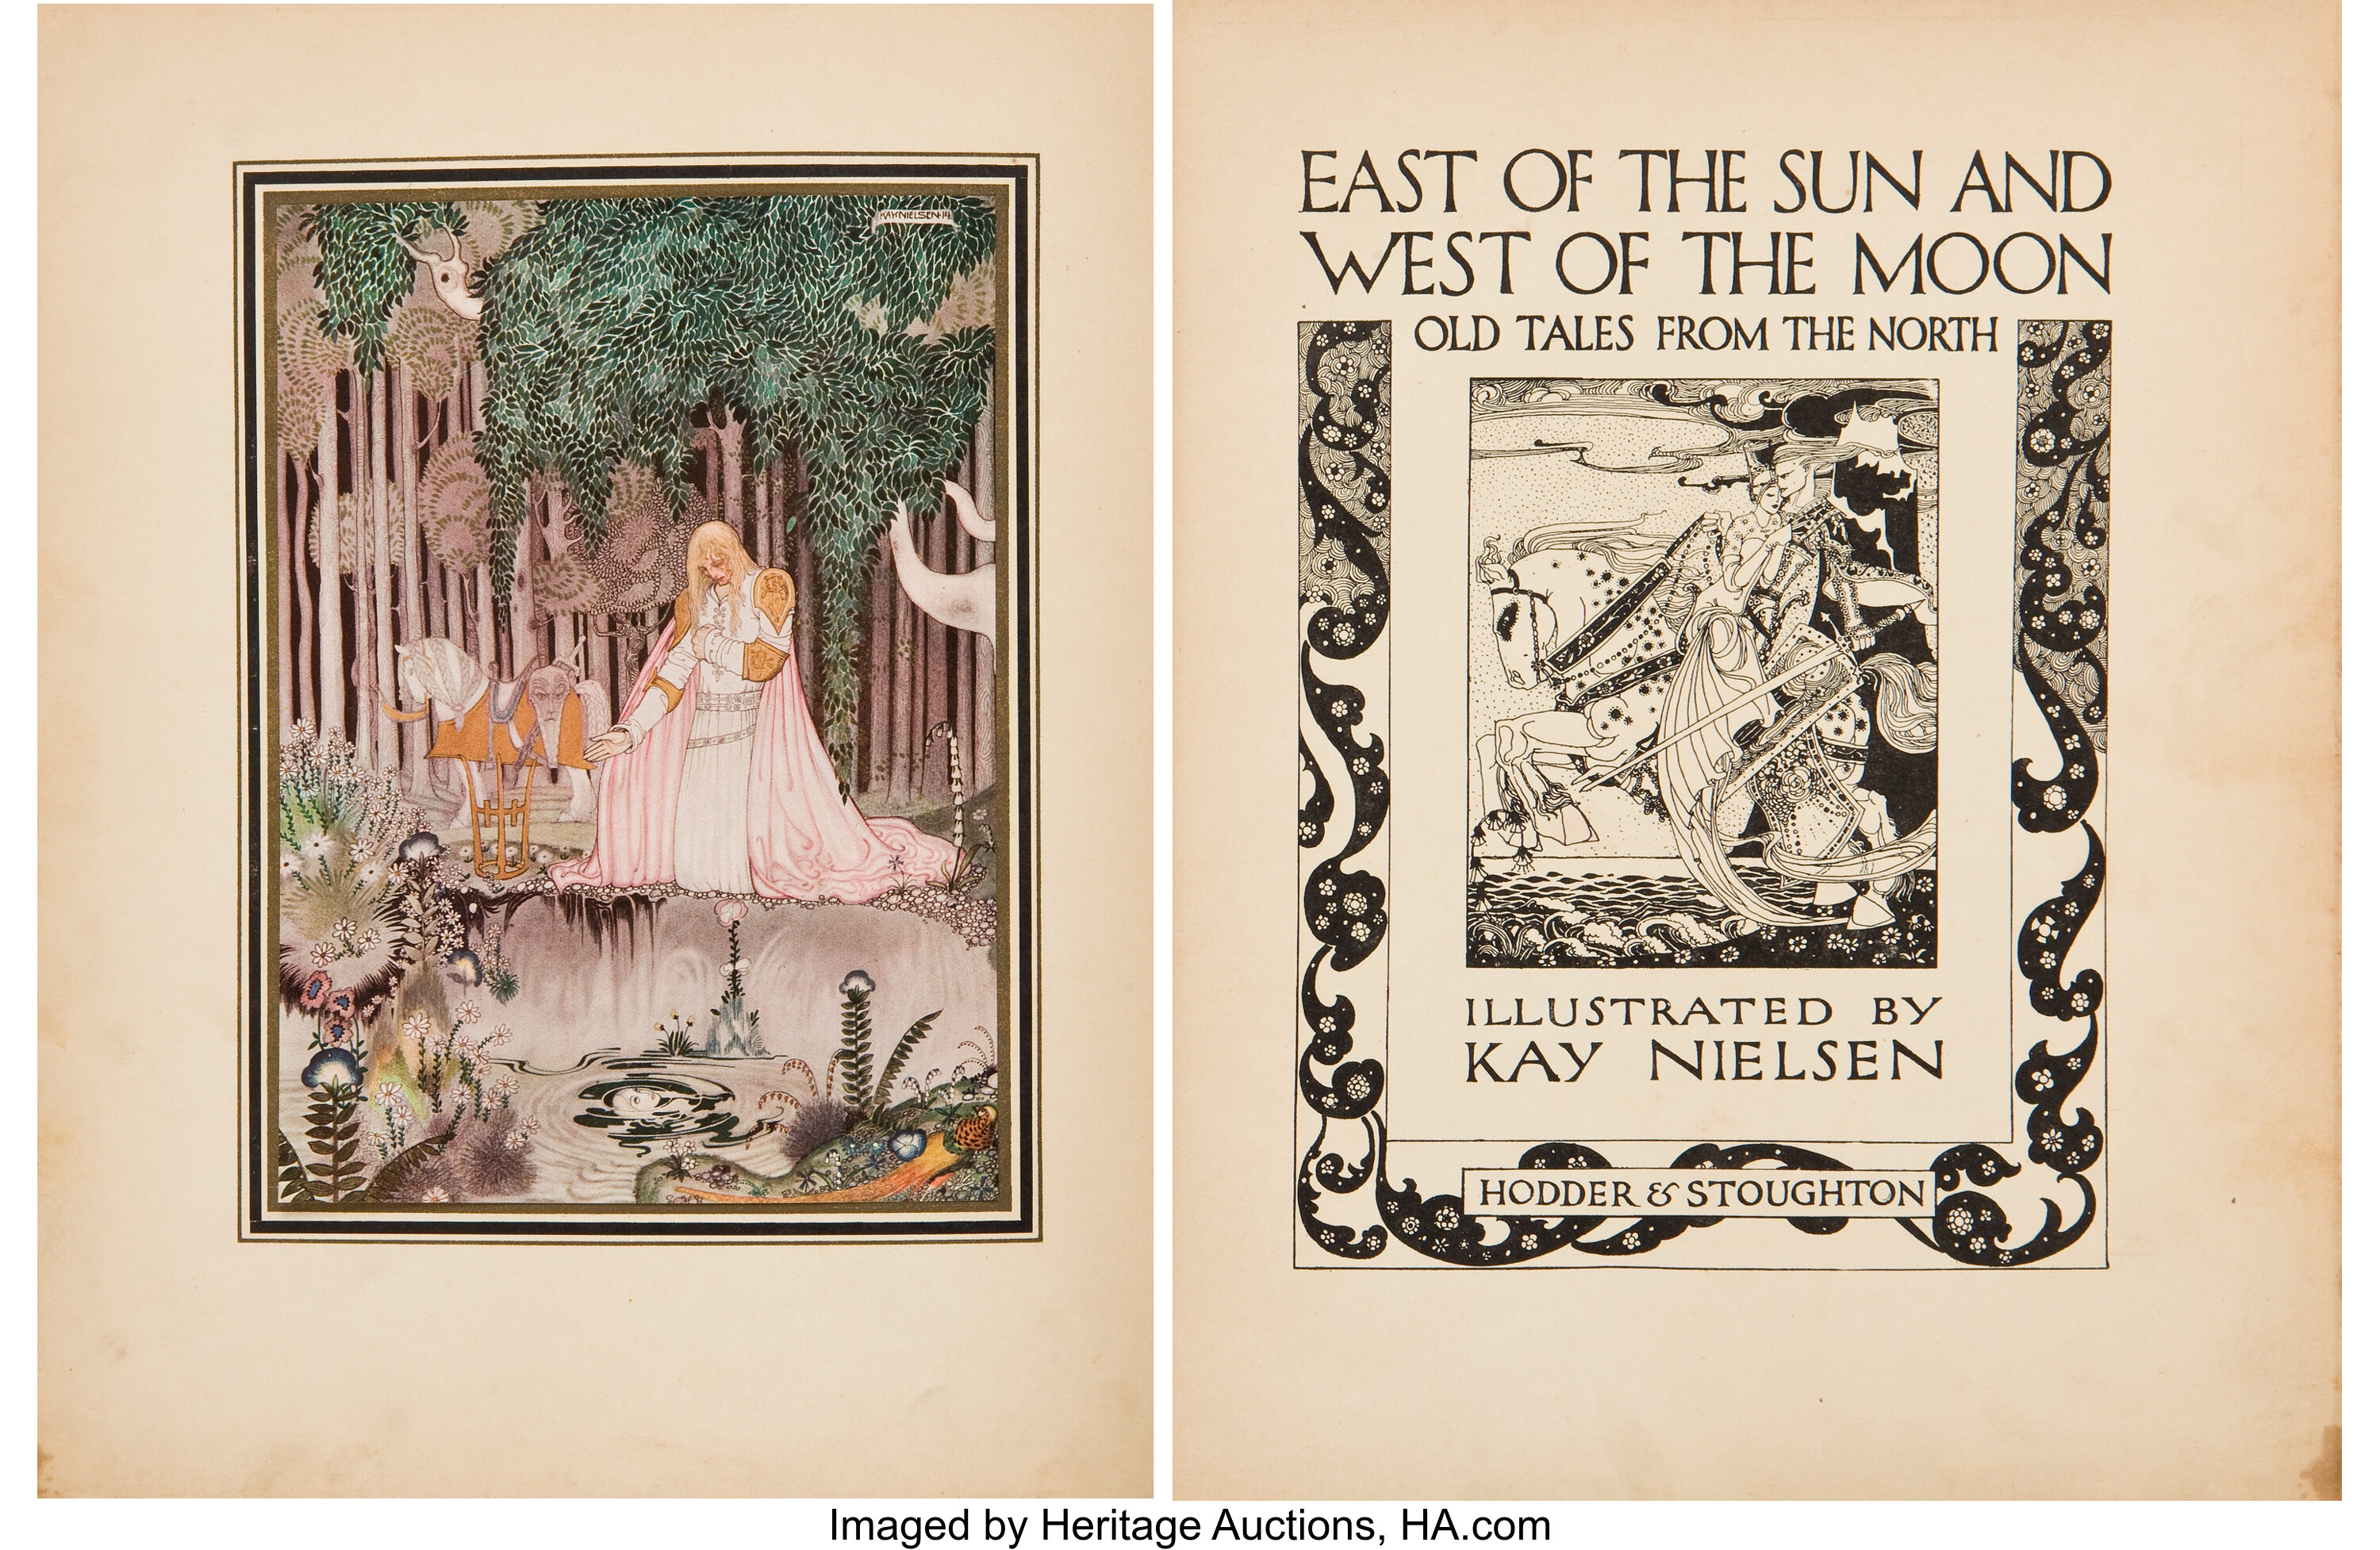 Kay Nielsen Illustrator East Of The Sun And West Of The Moon Lot Heritage Auctions